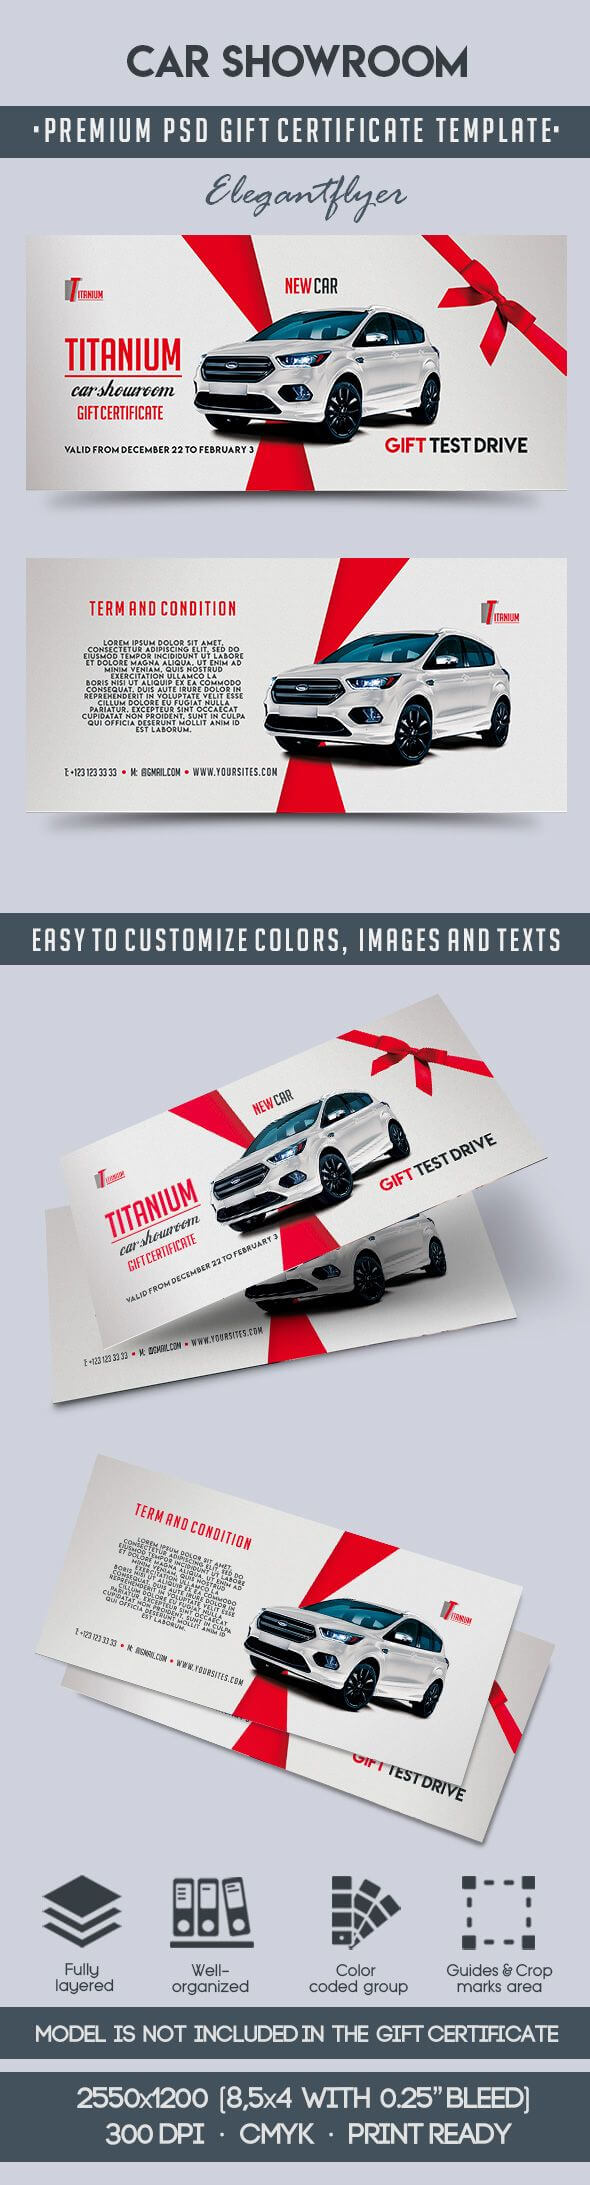 Car Showroom – Premium Gift Certificate Psd Template Intended For Automotive Gift Certificate Template